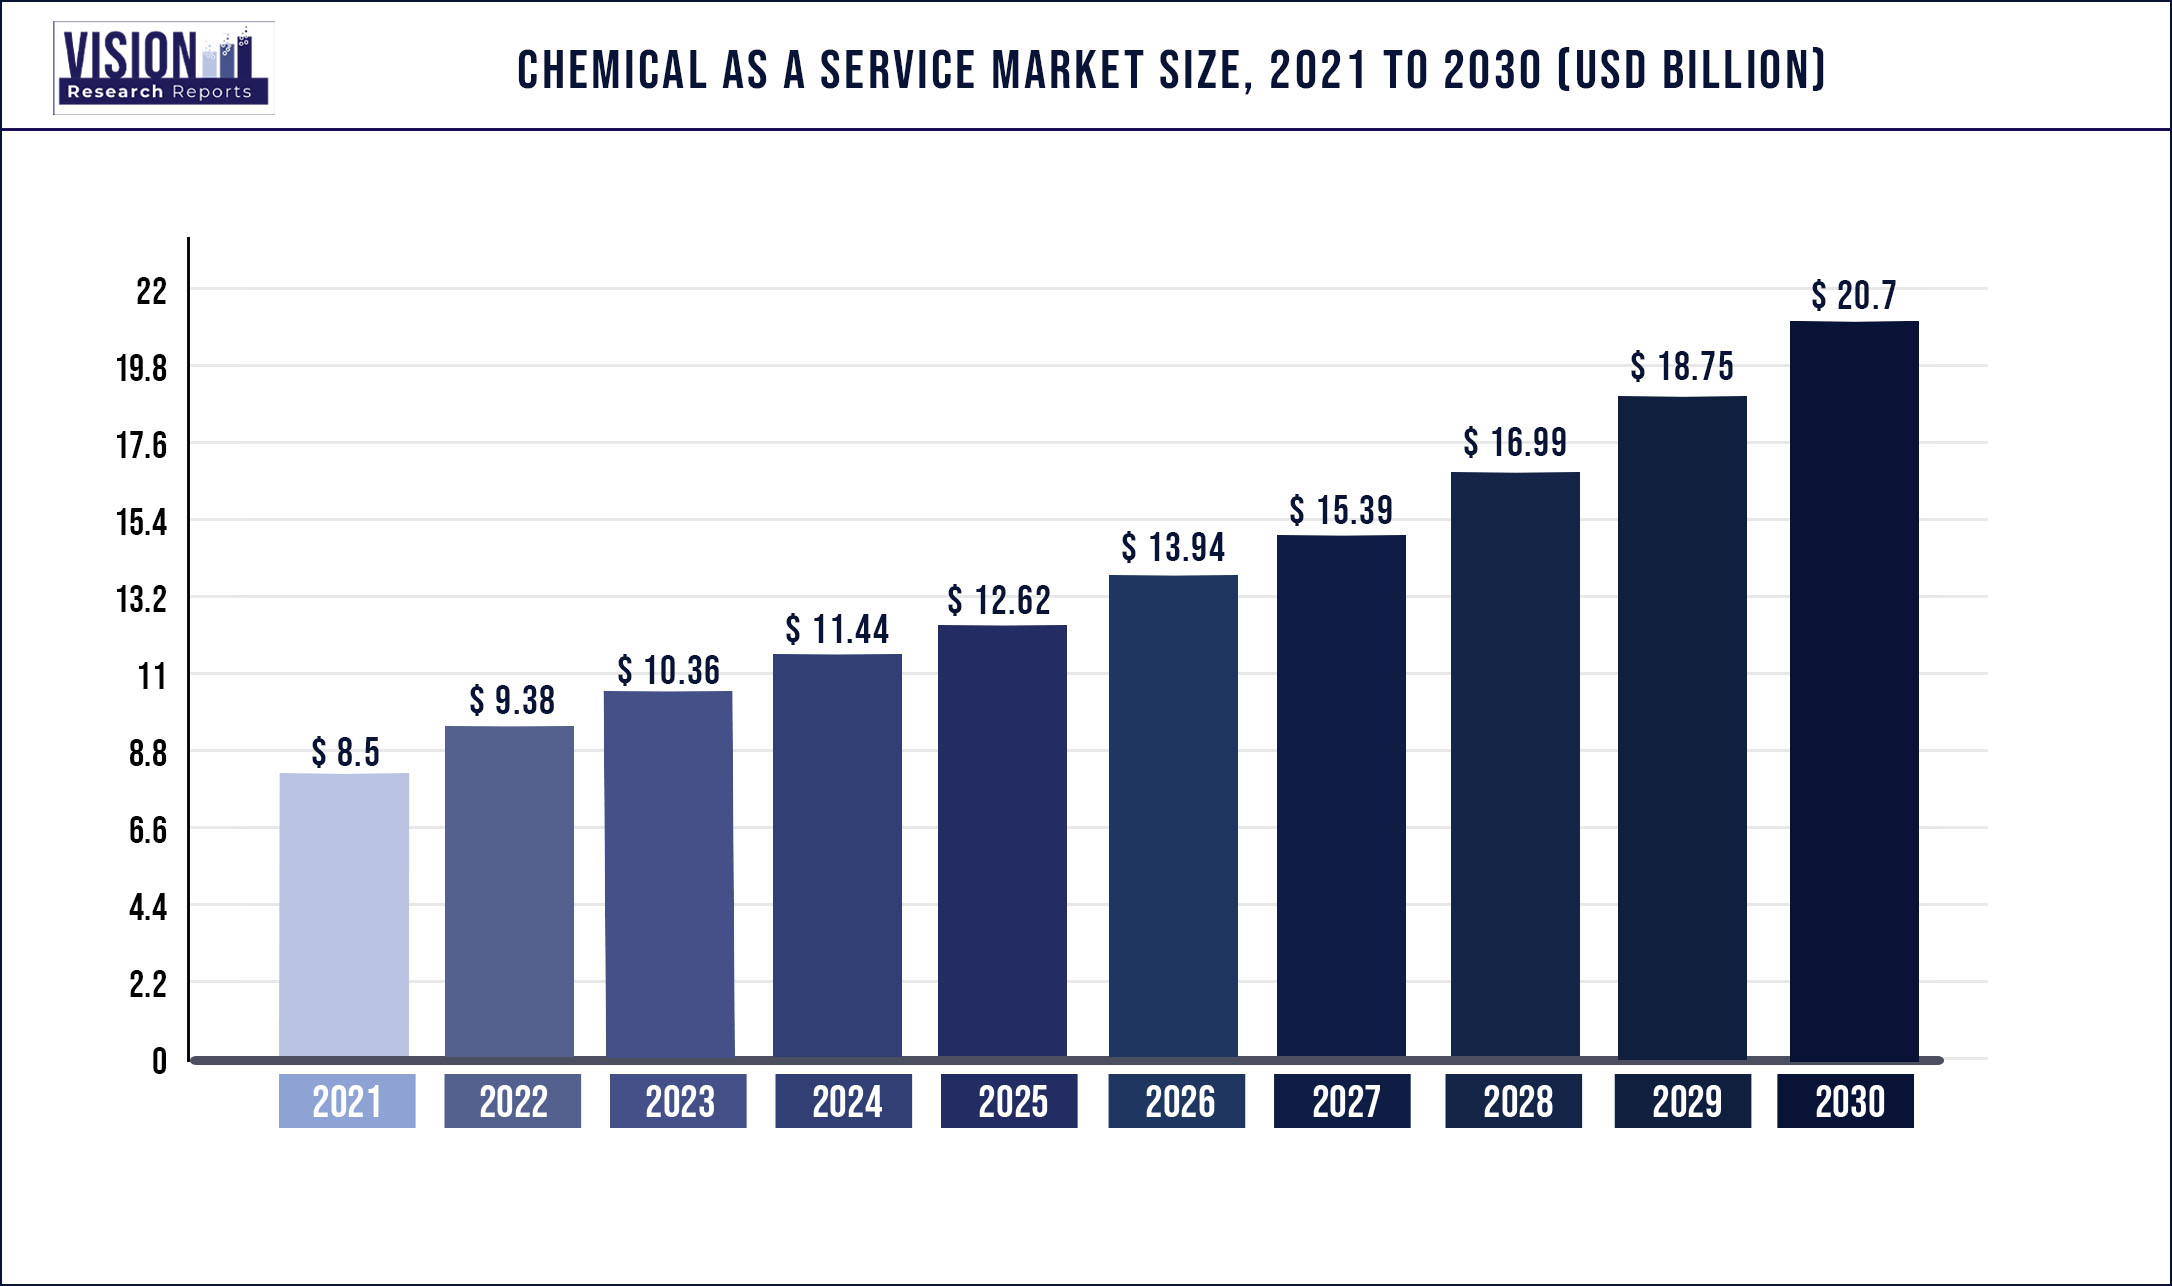 Chemical As A Service Market Size 2021 to 2030